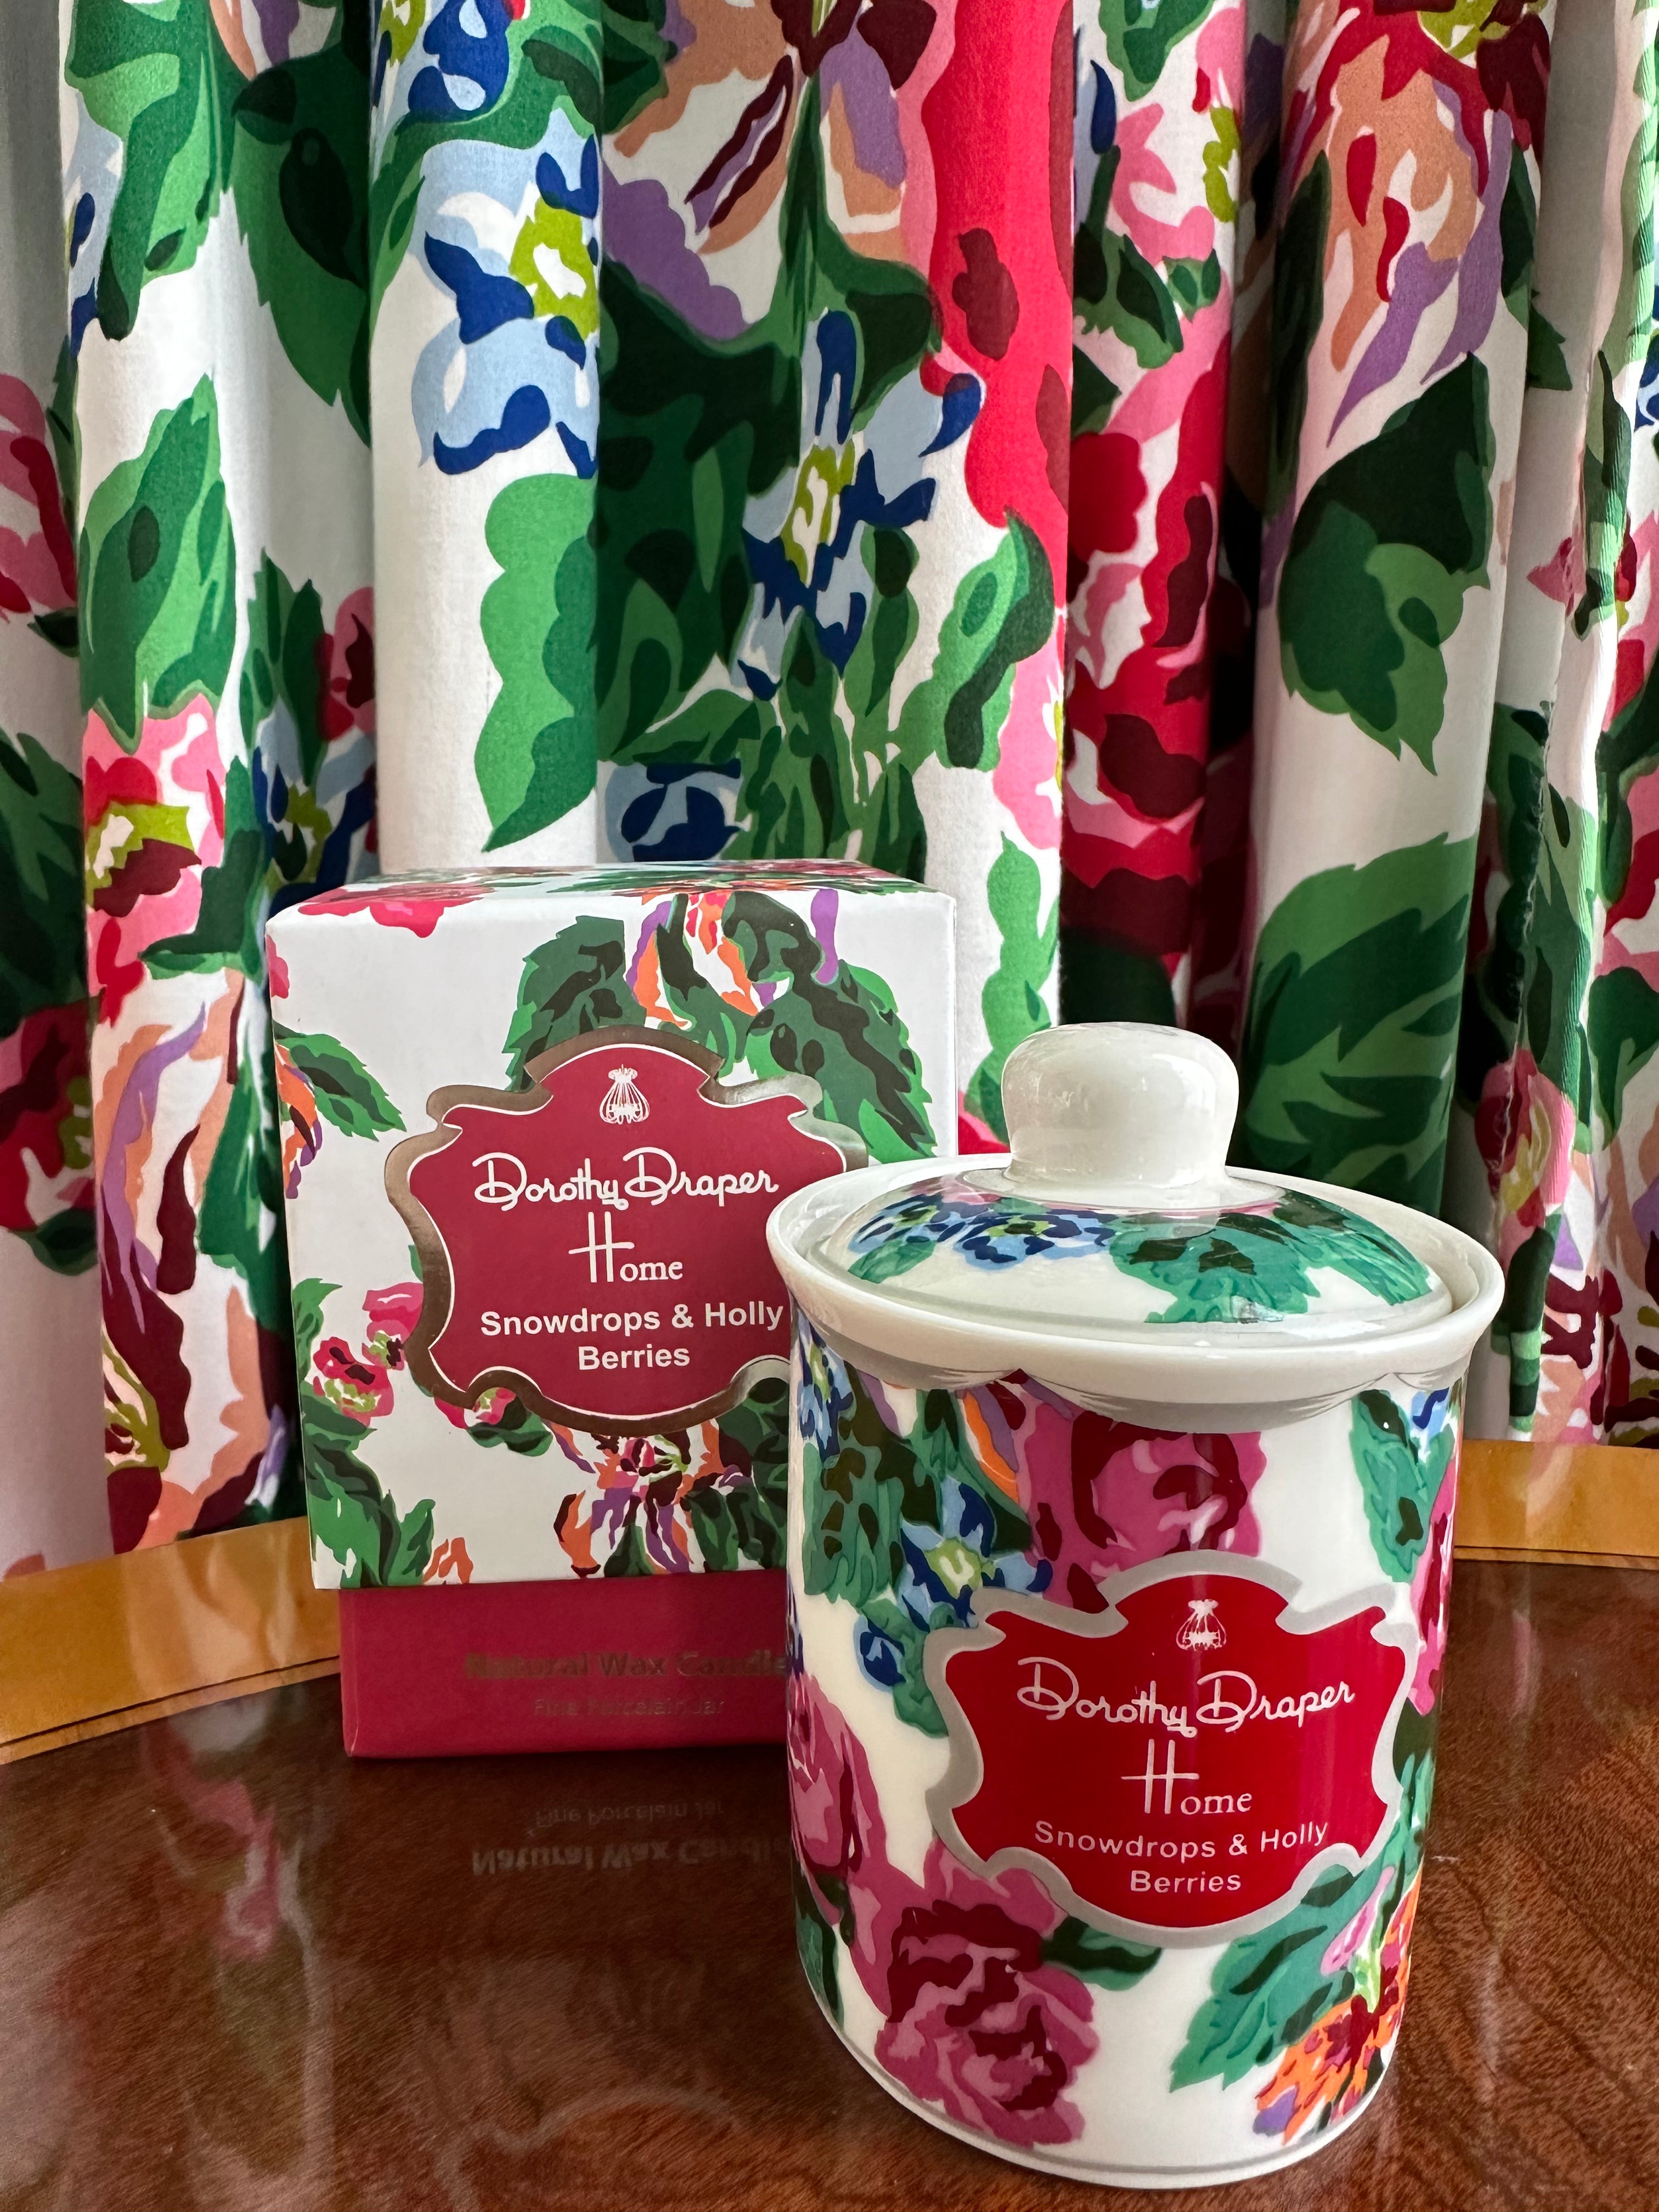 Fazenda Lily Porcelain Candle - Snowdrops & Holly Berries